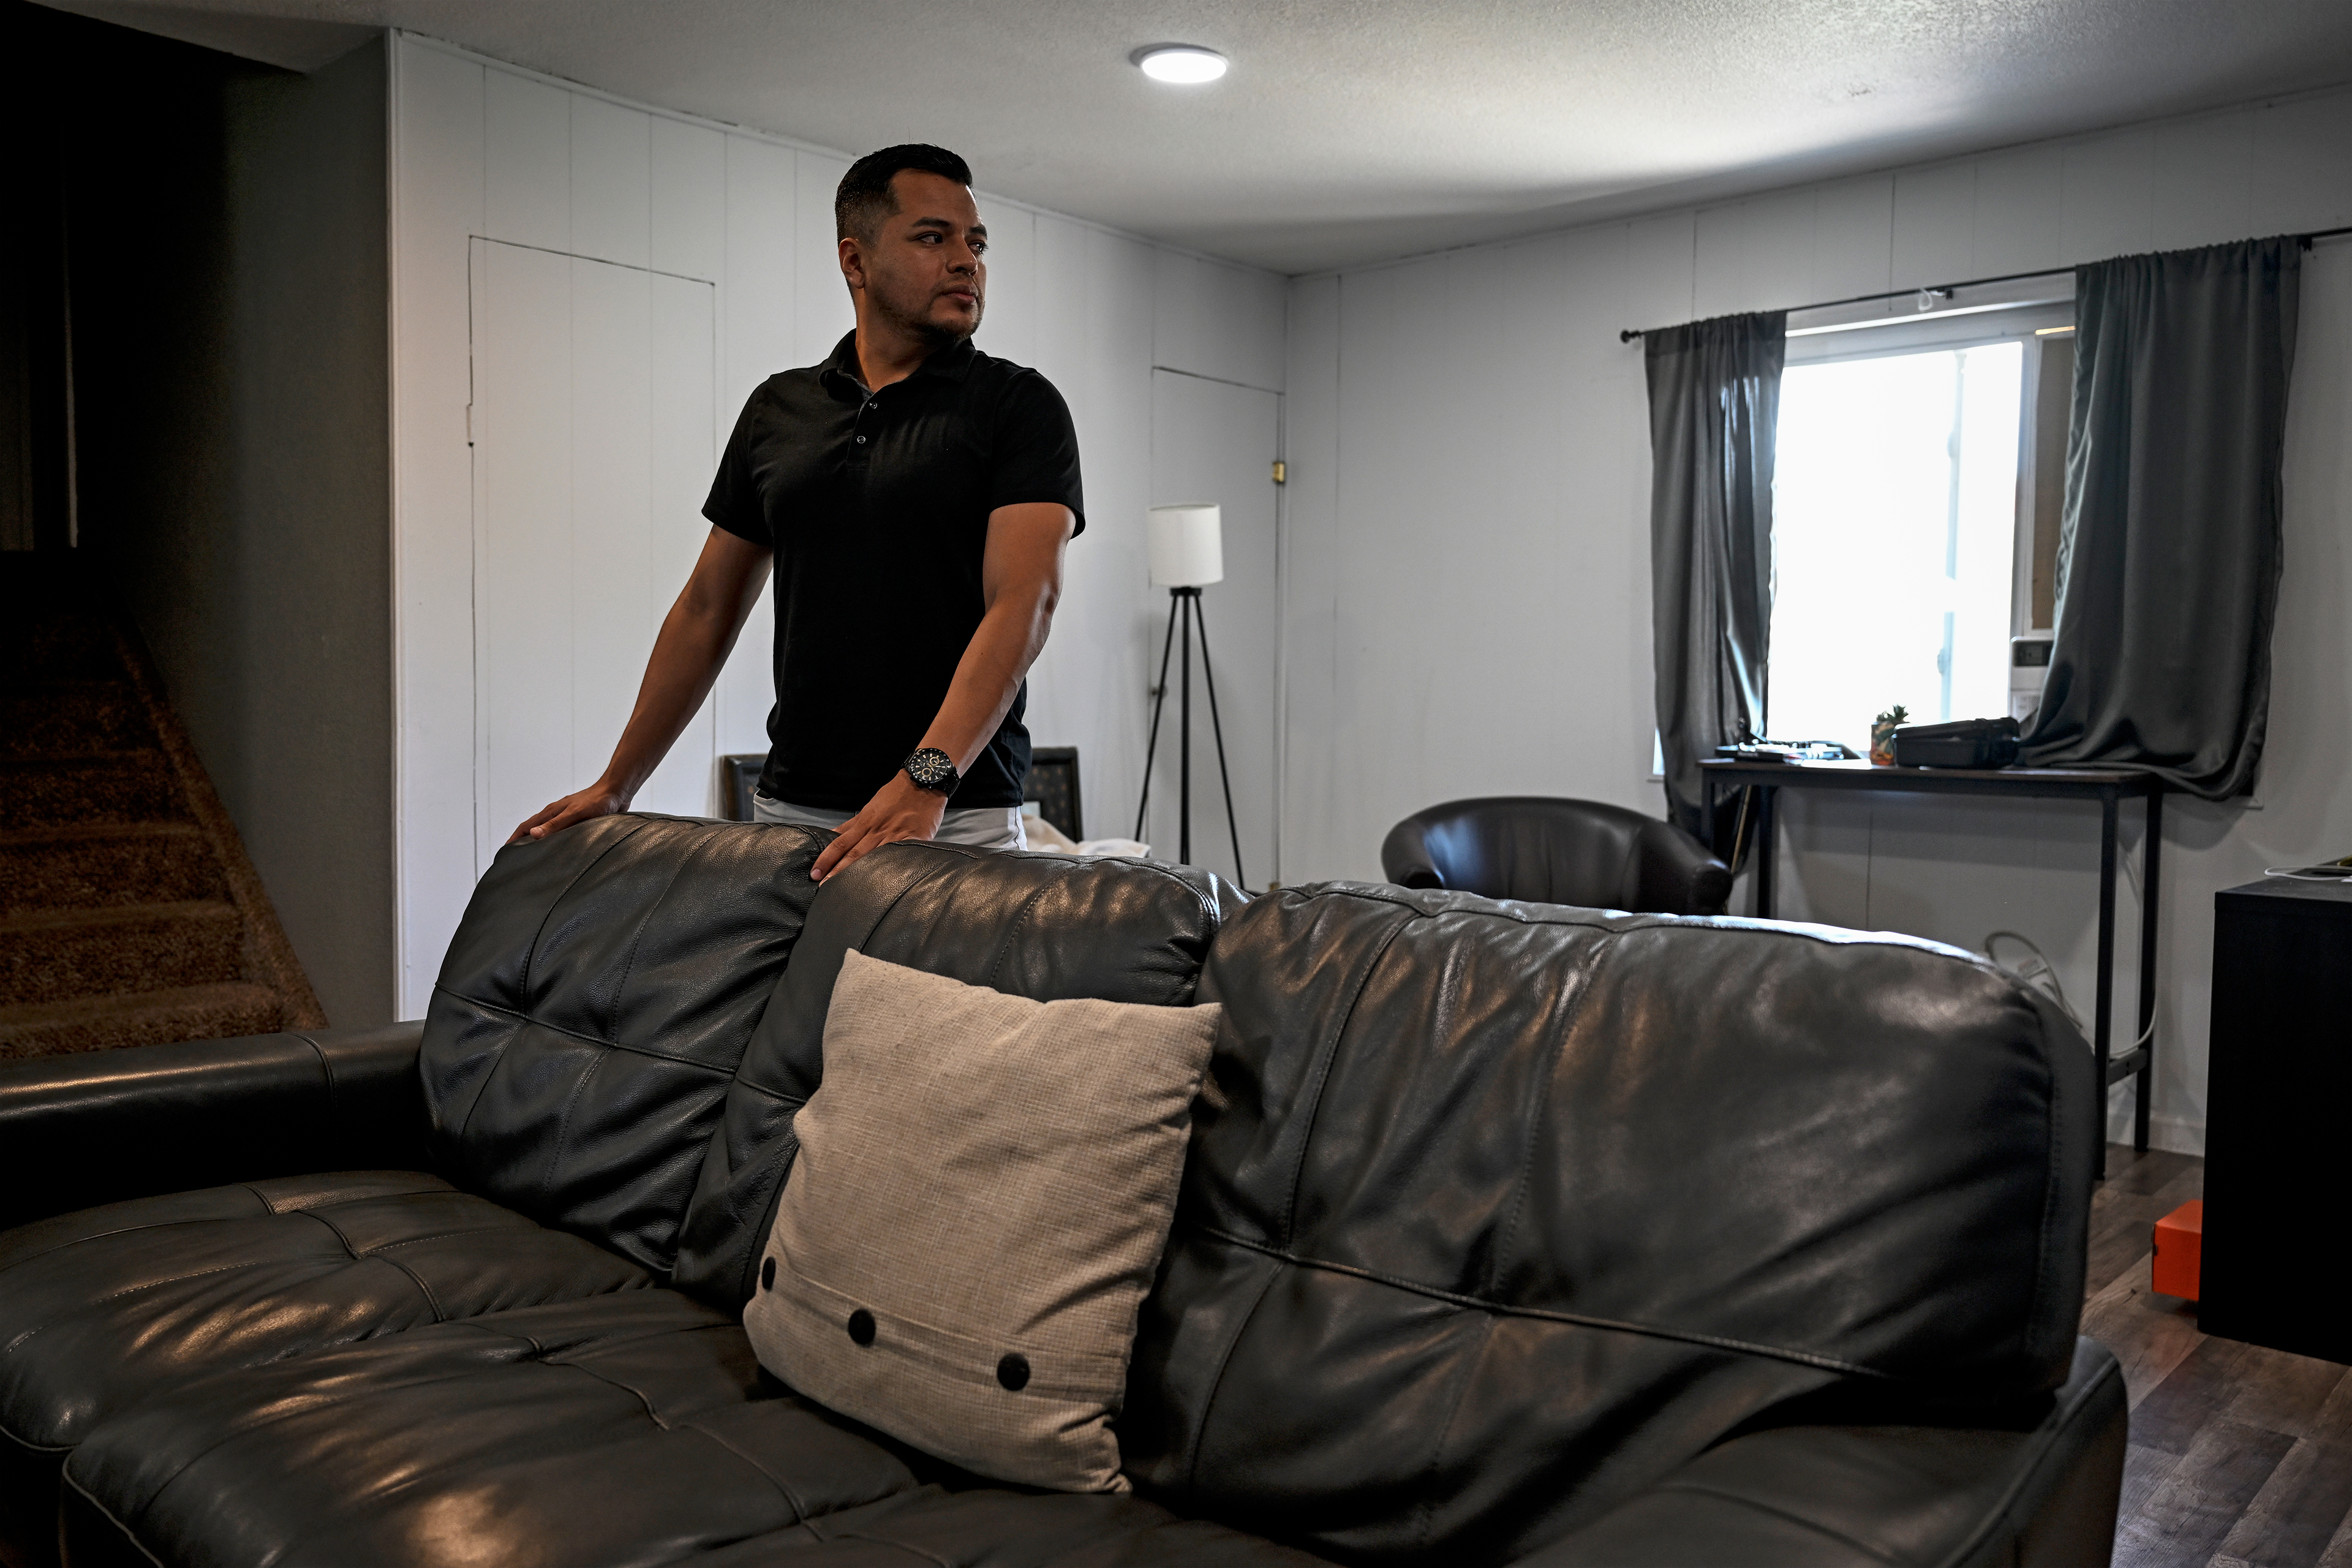 Photo showing Armando Peniche Rosales standing next to a sofa at home.